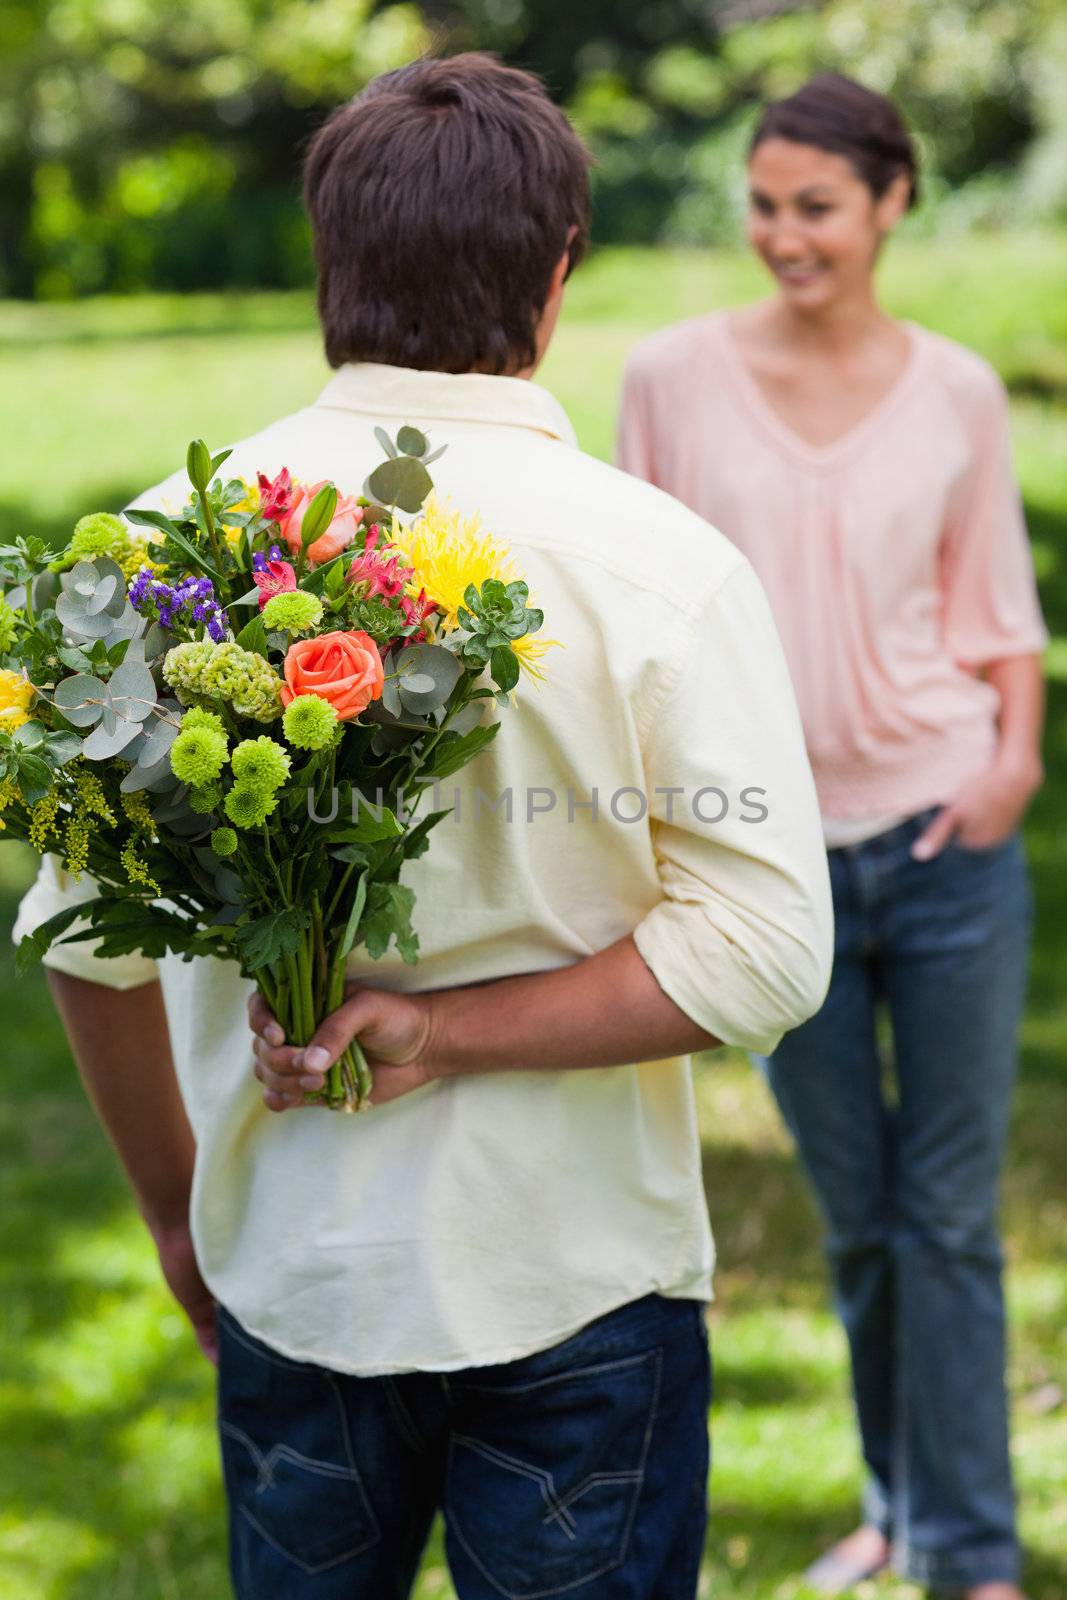 Man about to surprise his friend with a bouquet of flowers by Wavebreakmedia